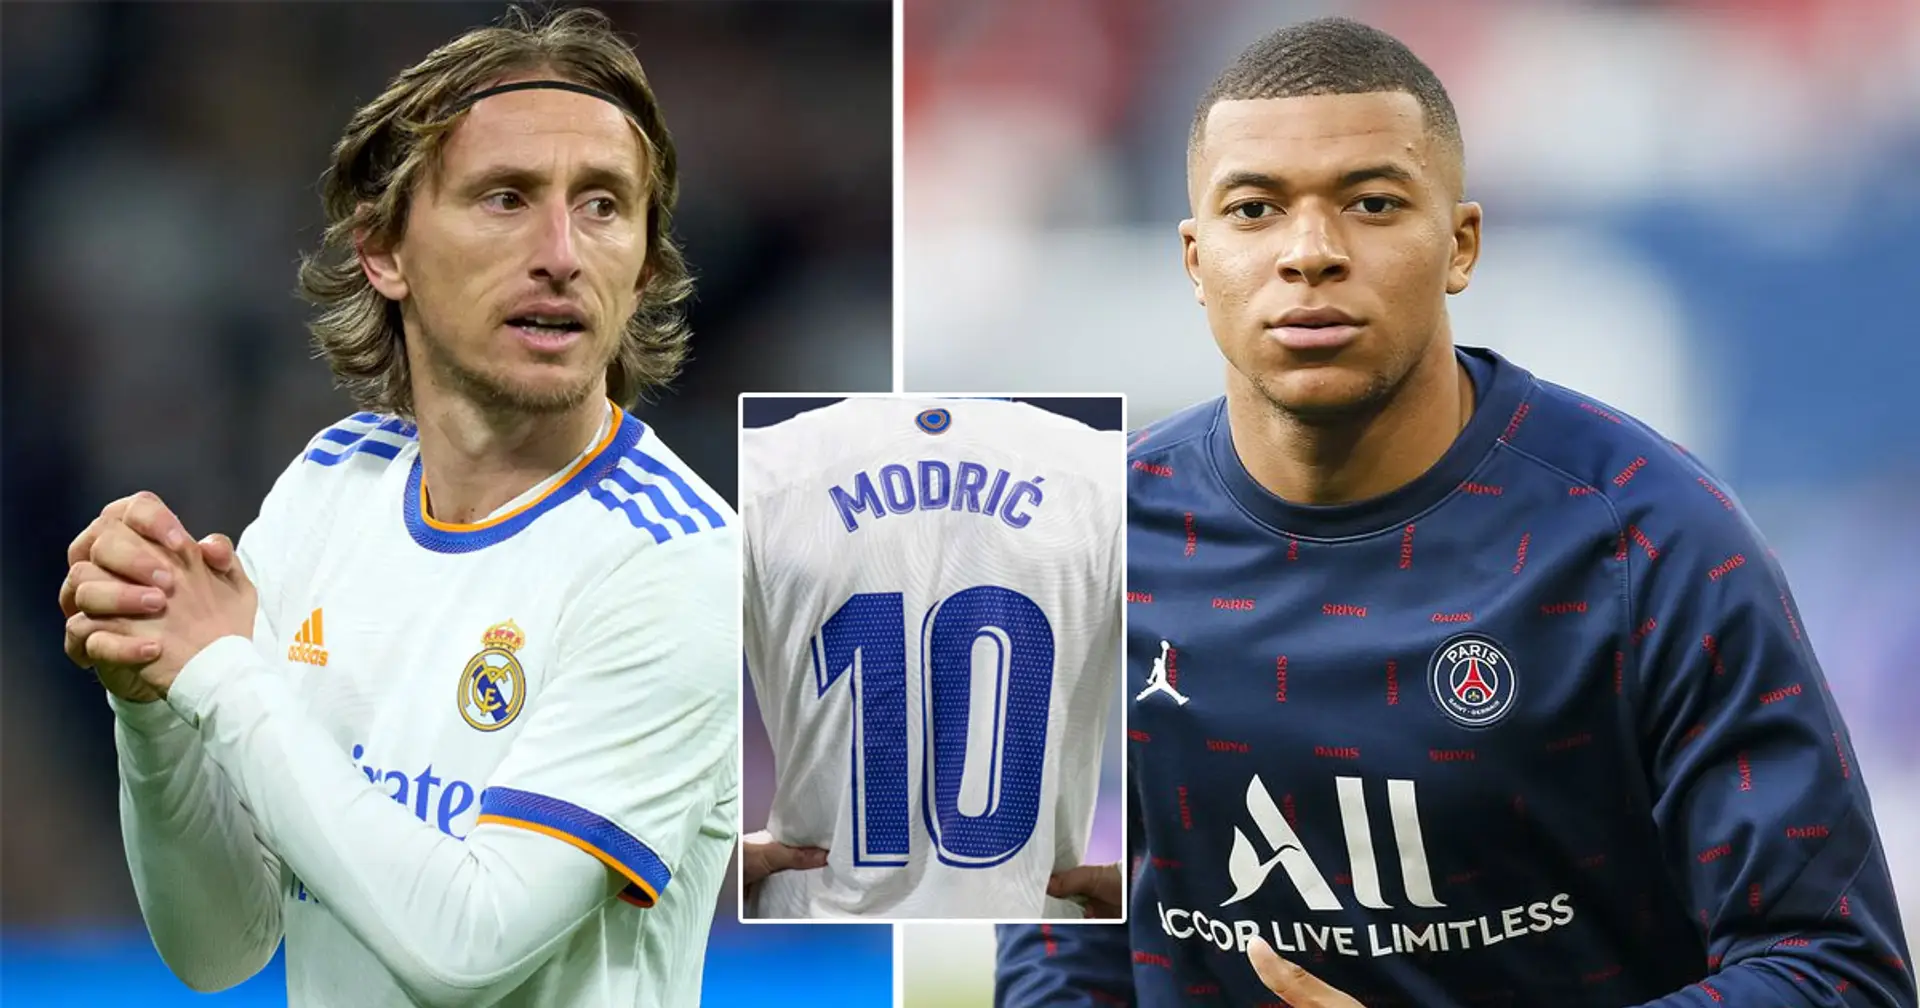 Modric reportedly agreed to let Mbappe take no.10 jersey at Real Madrid - Football | Tribuna.com